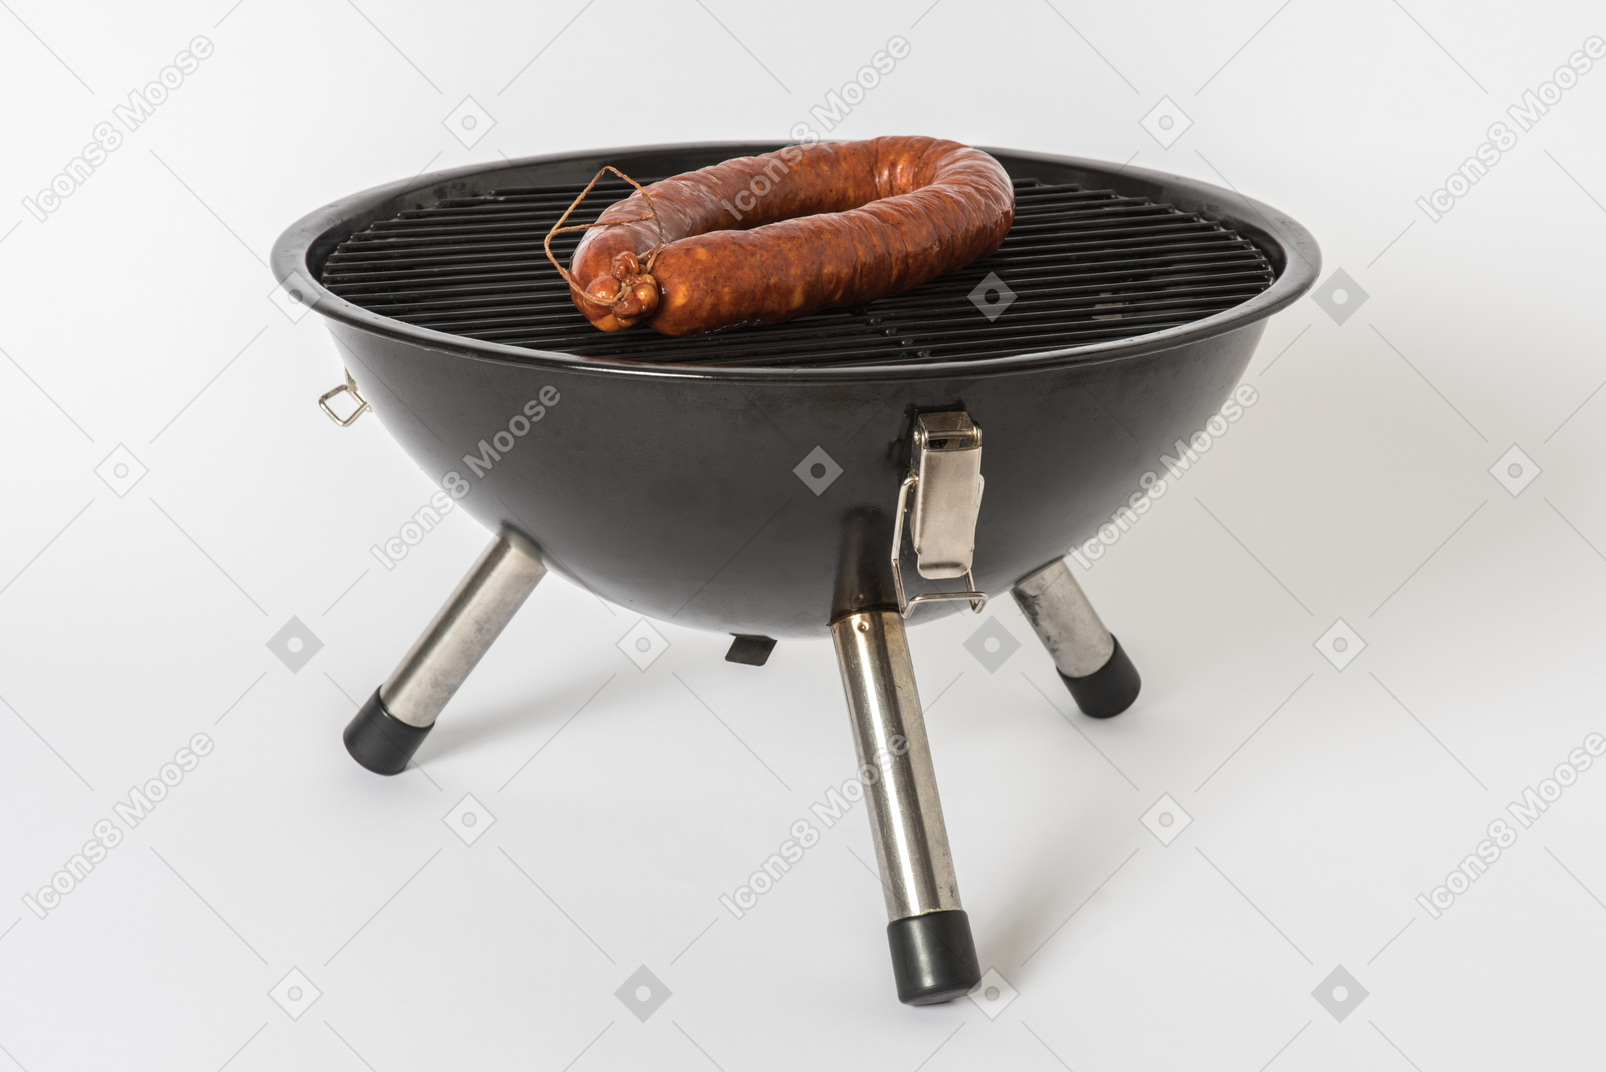 Sausage on grill on white background